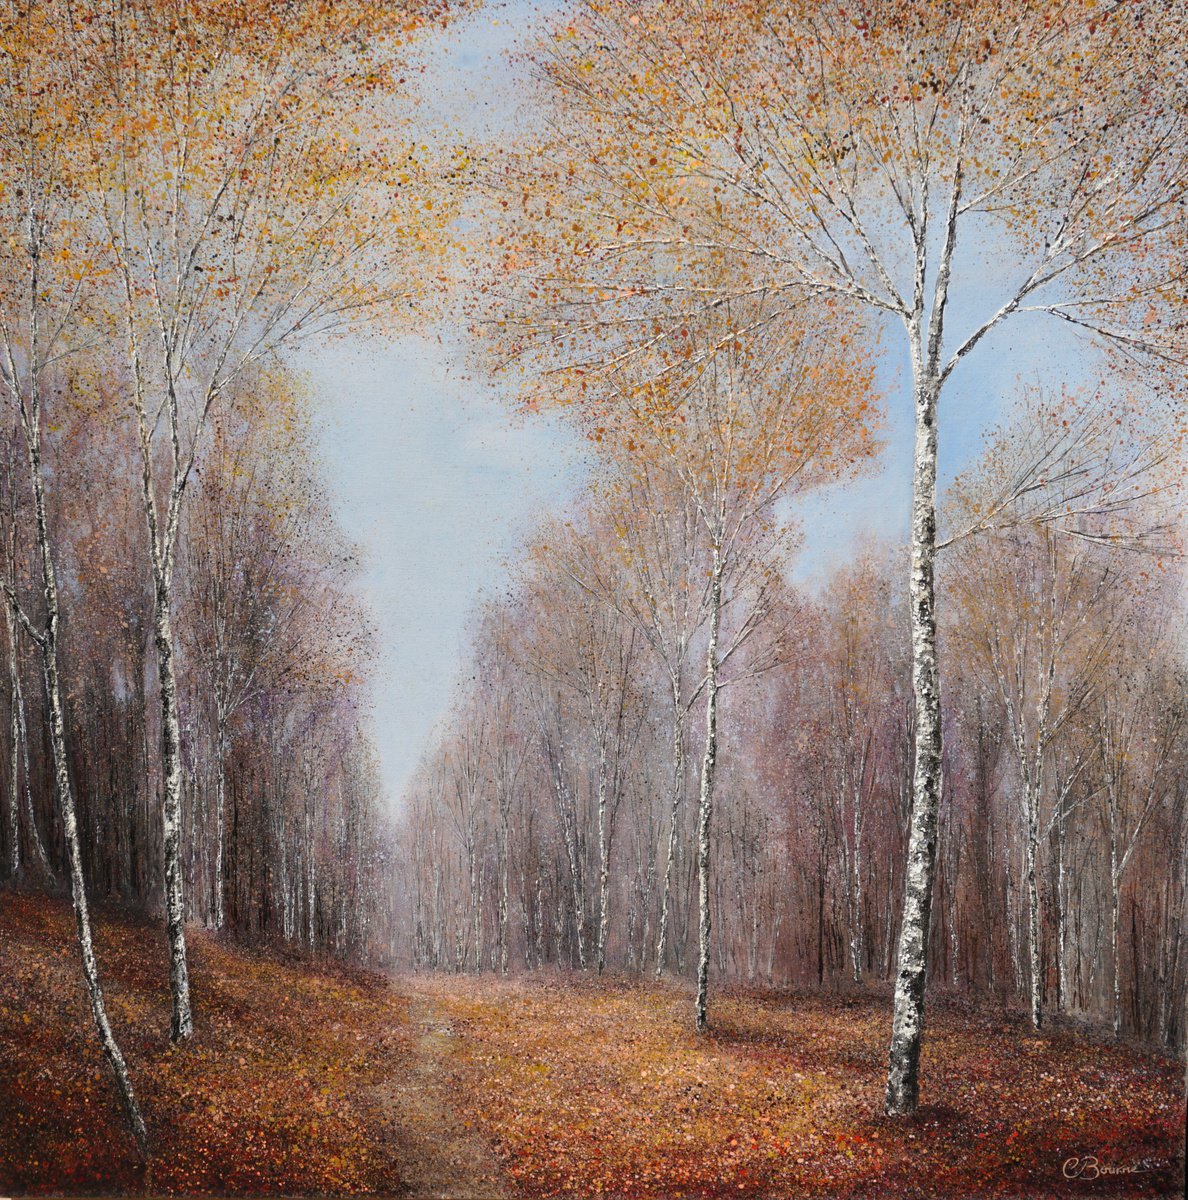 Kicking Up The Leaves | 91cm x 91cm by Chris Bourne